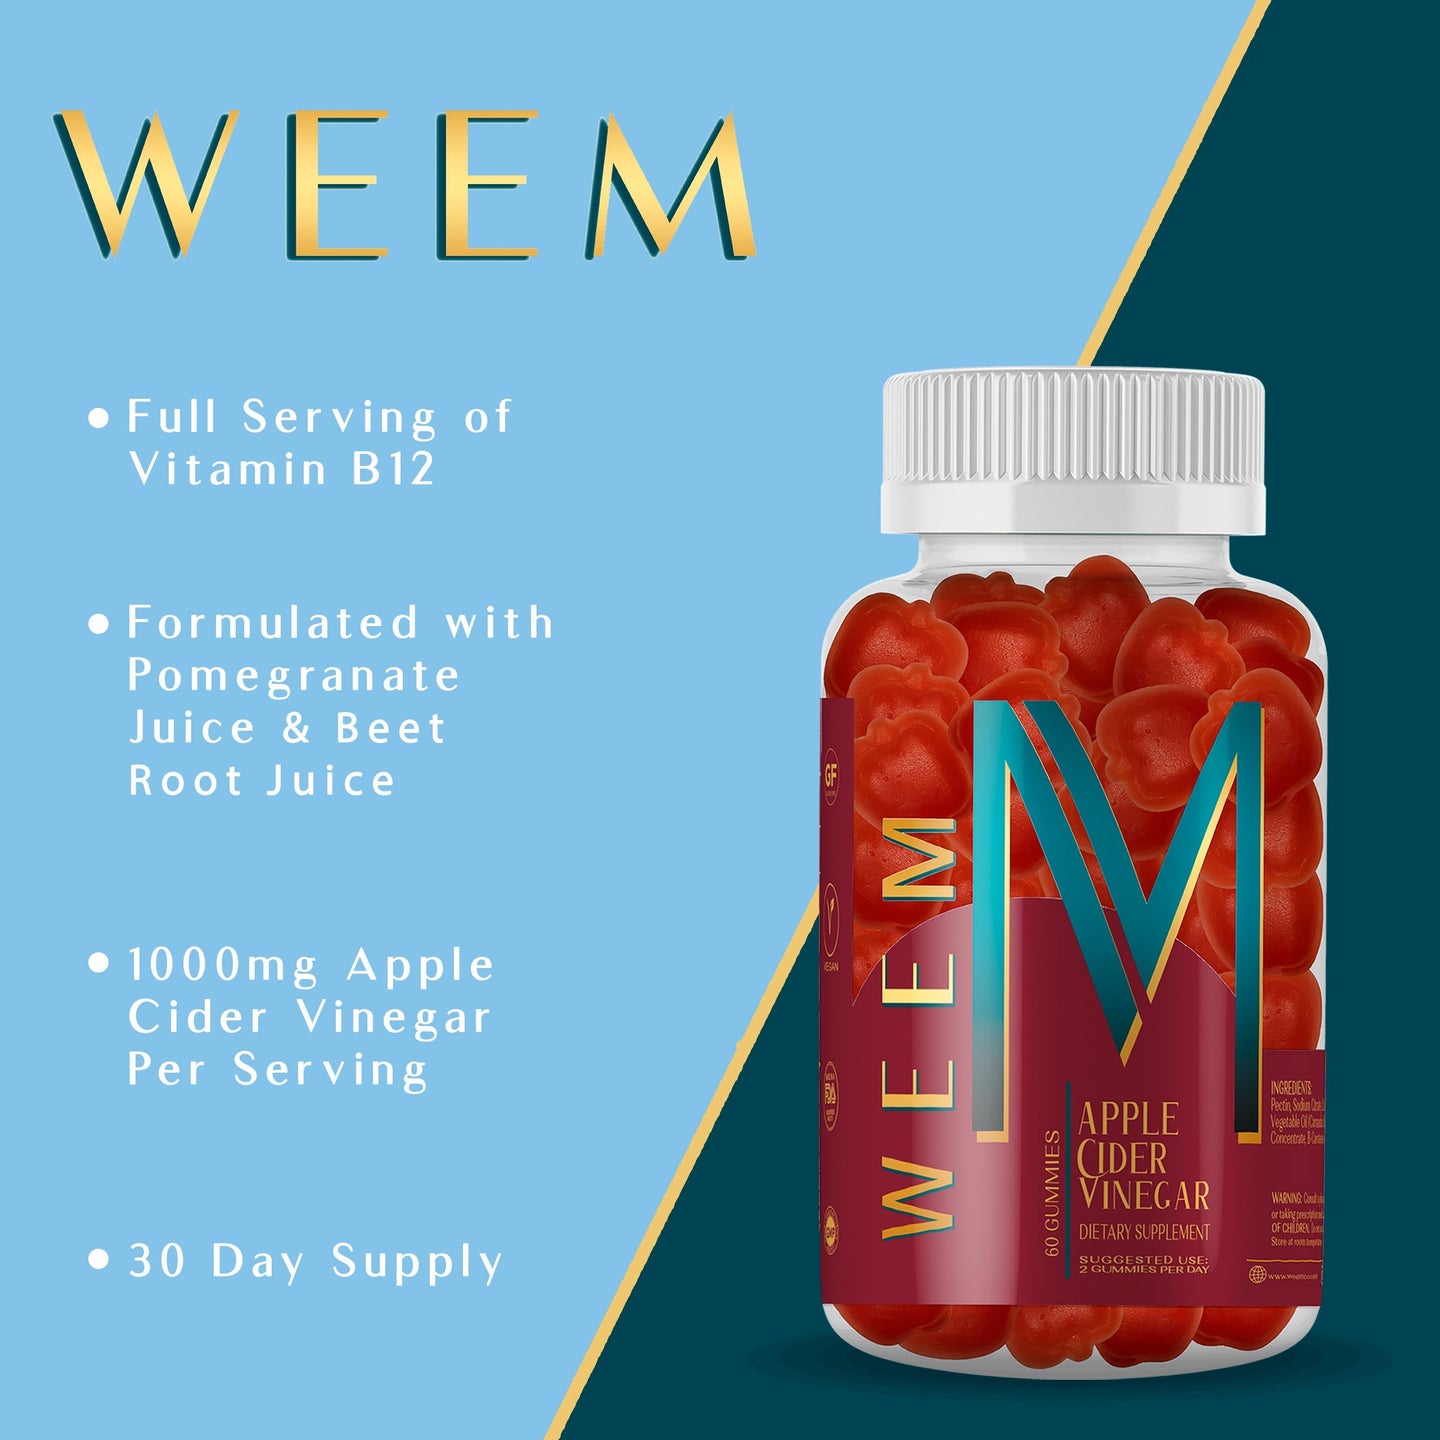 Load image into Gallery viewer, All the benefits of Apple Cider Vinegar in one tasty gummy - weem
